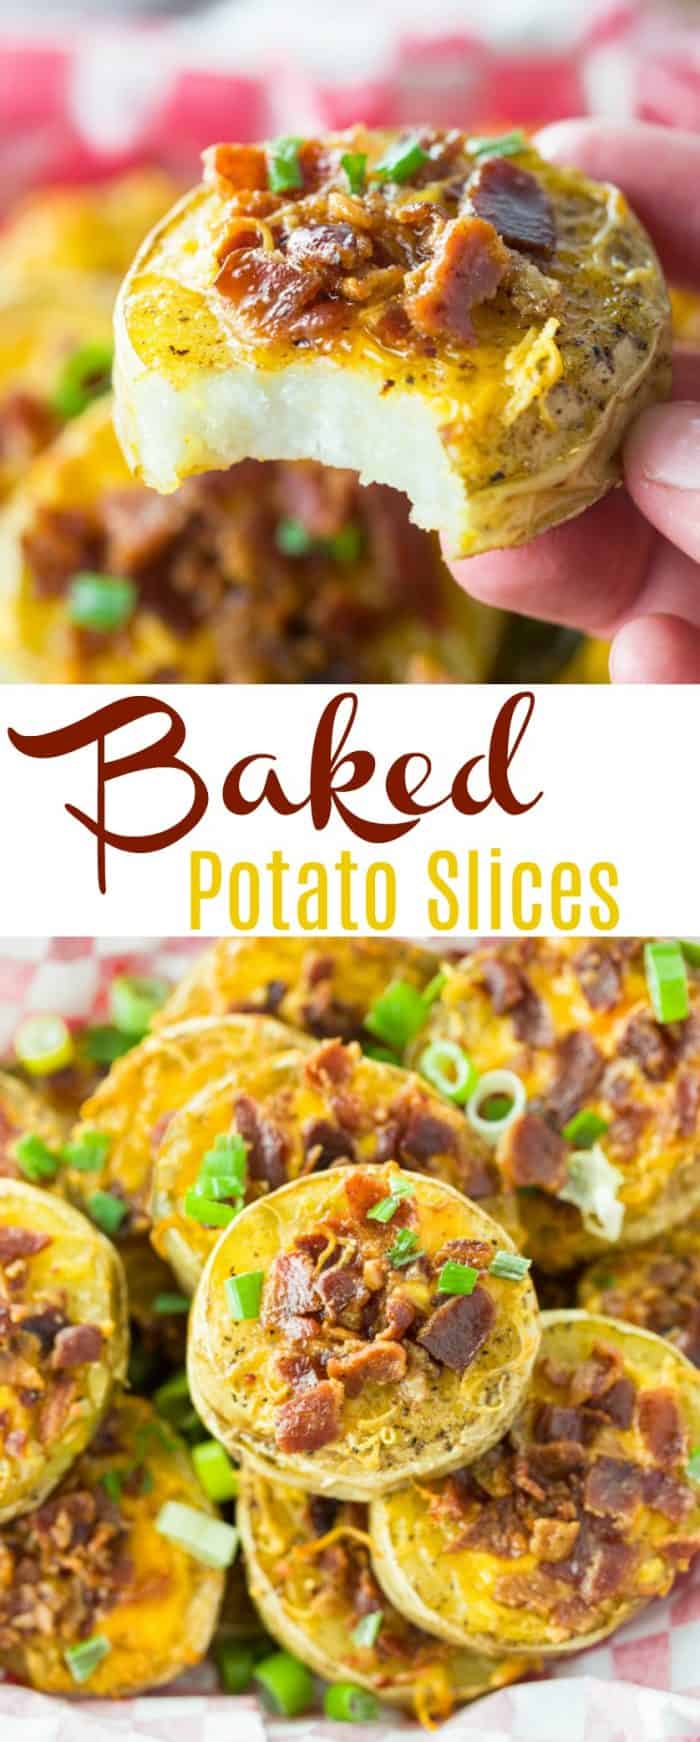 These Baked Potato slices are topped with melted cheese and crispy bacon, baked to golden perfection and served with sour cream for dipping! | The Cozy Cook |#appetizers #gameday #bacon #potatoes #fingerfood #snacks #partysnacks #cheese #comfortfood